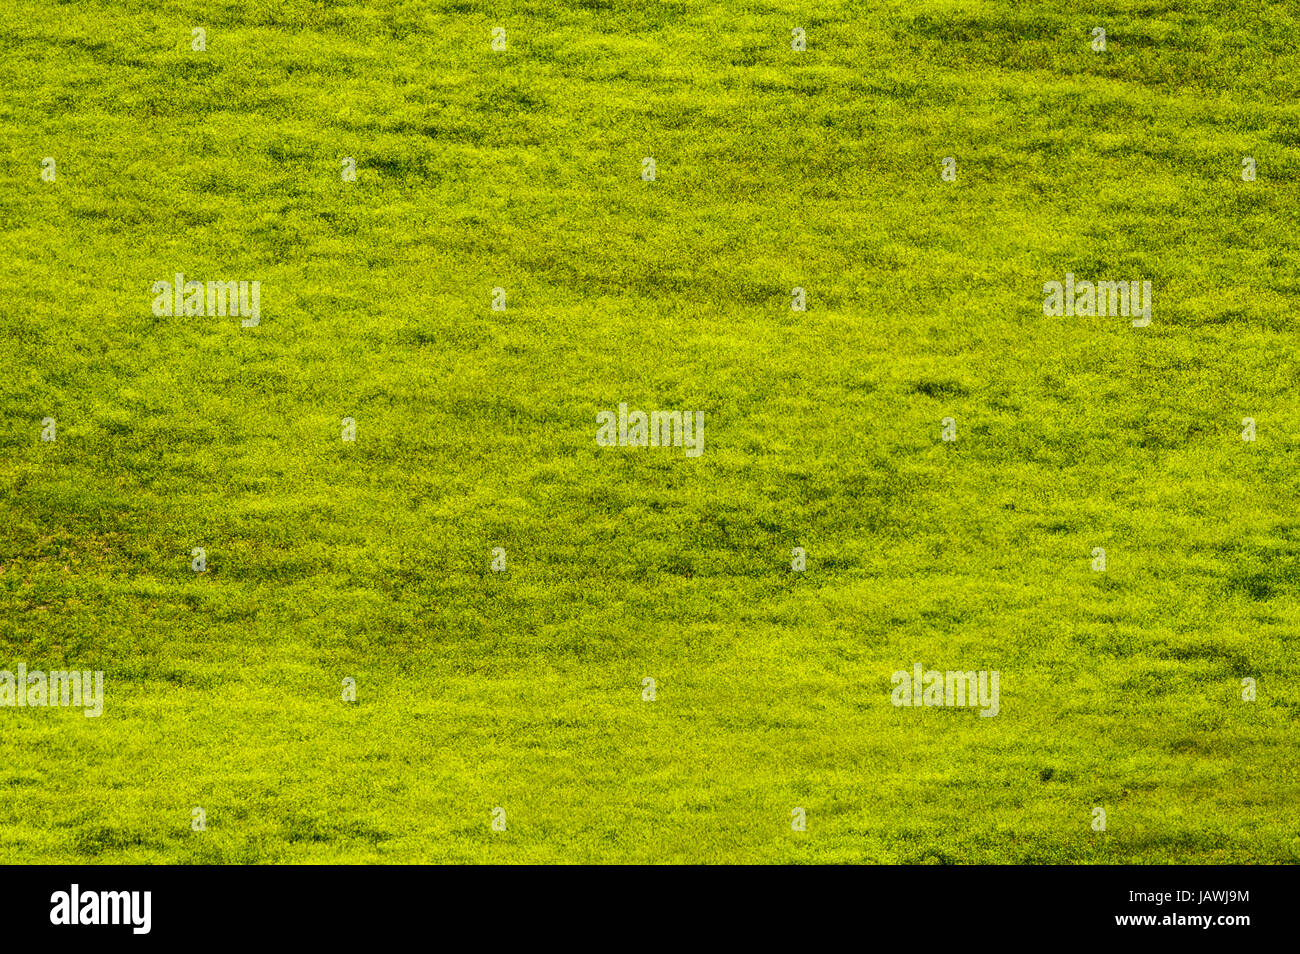 A lush green agricultural crop on a farm in the Andes mountains. Stock Photo